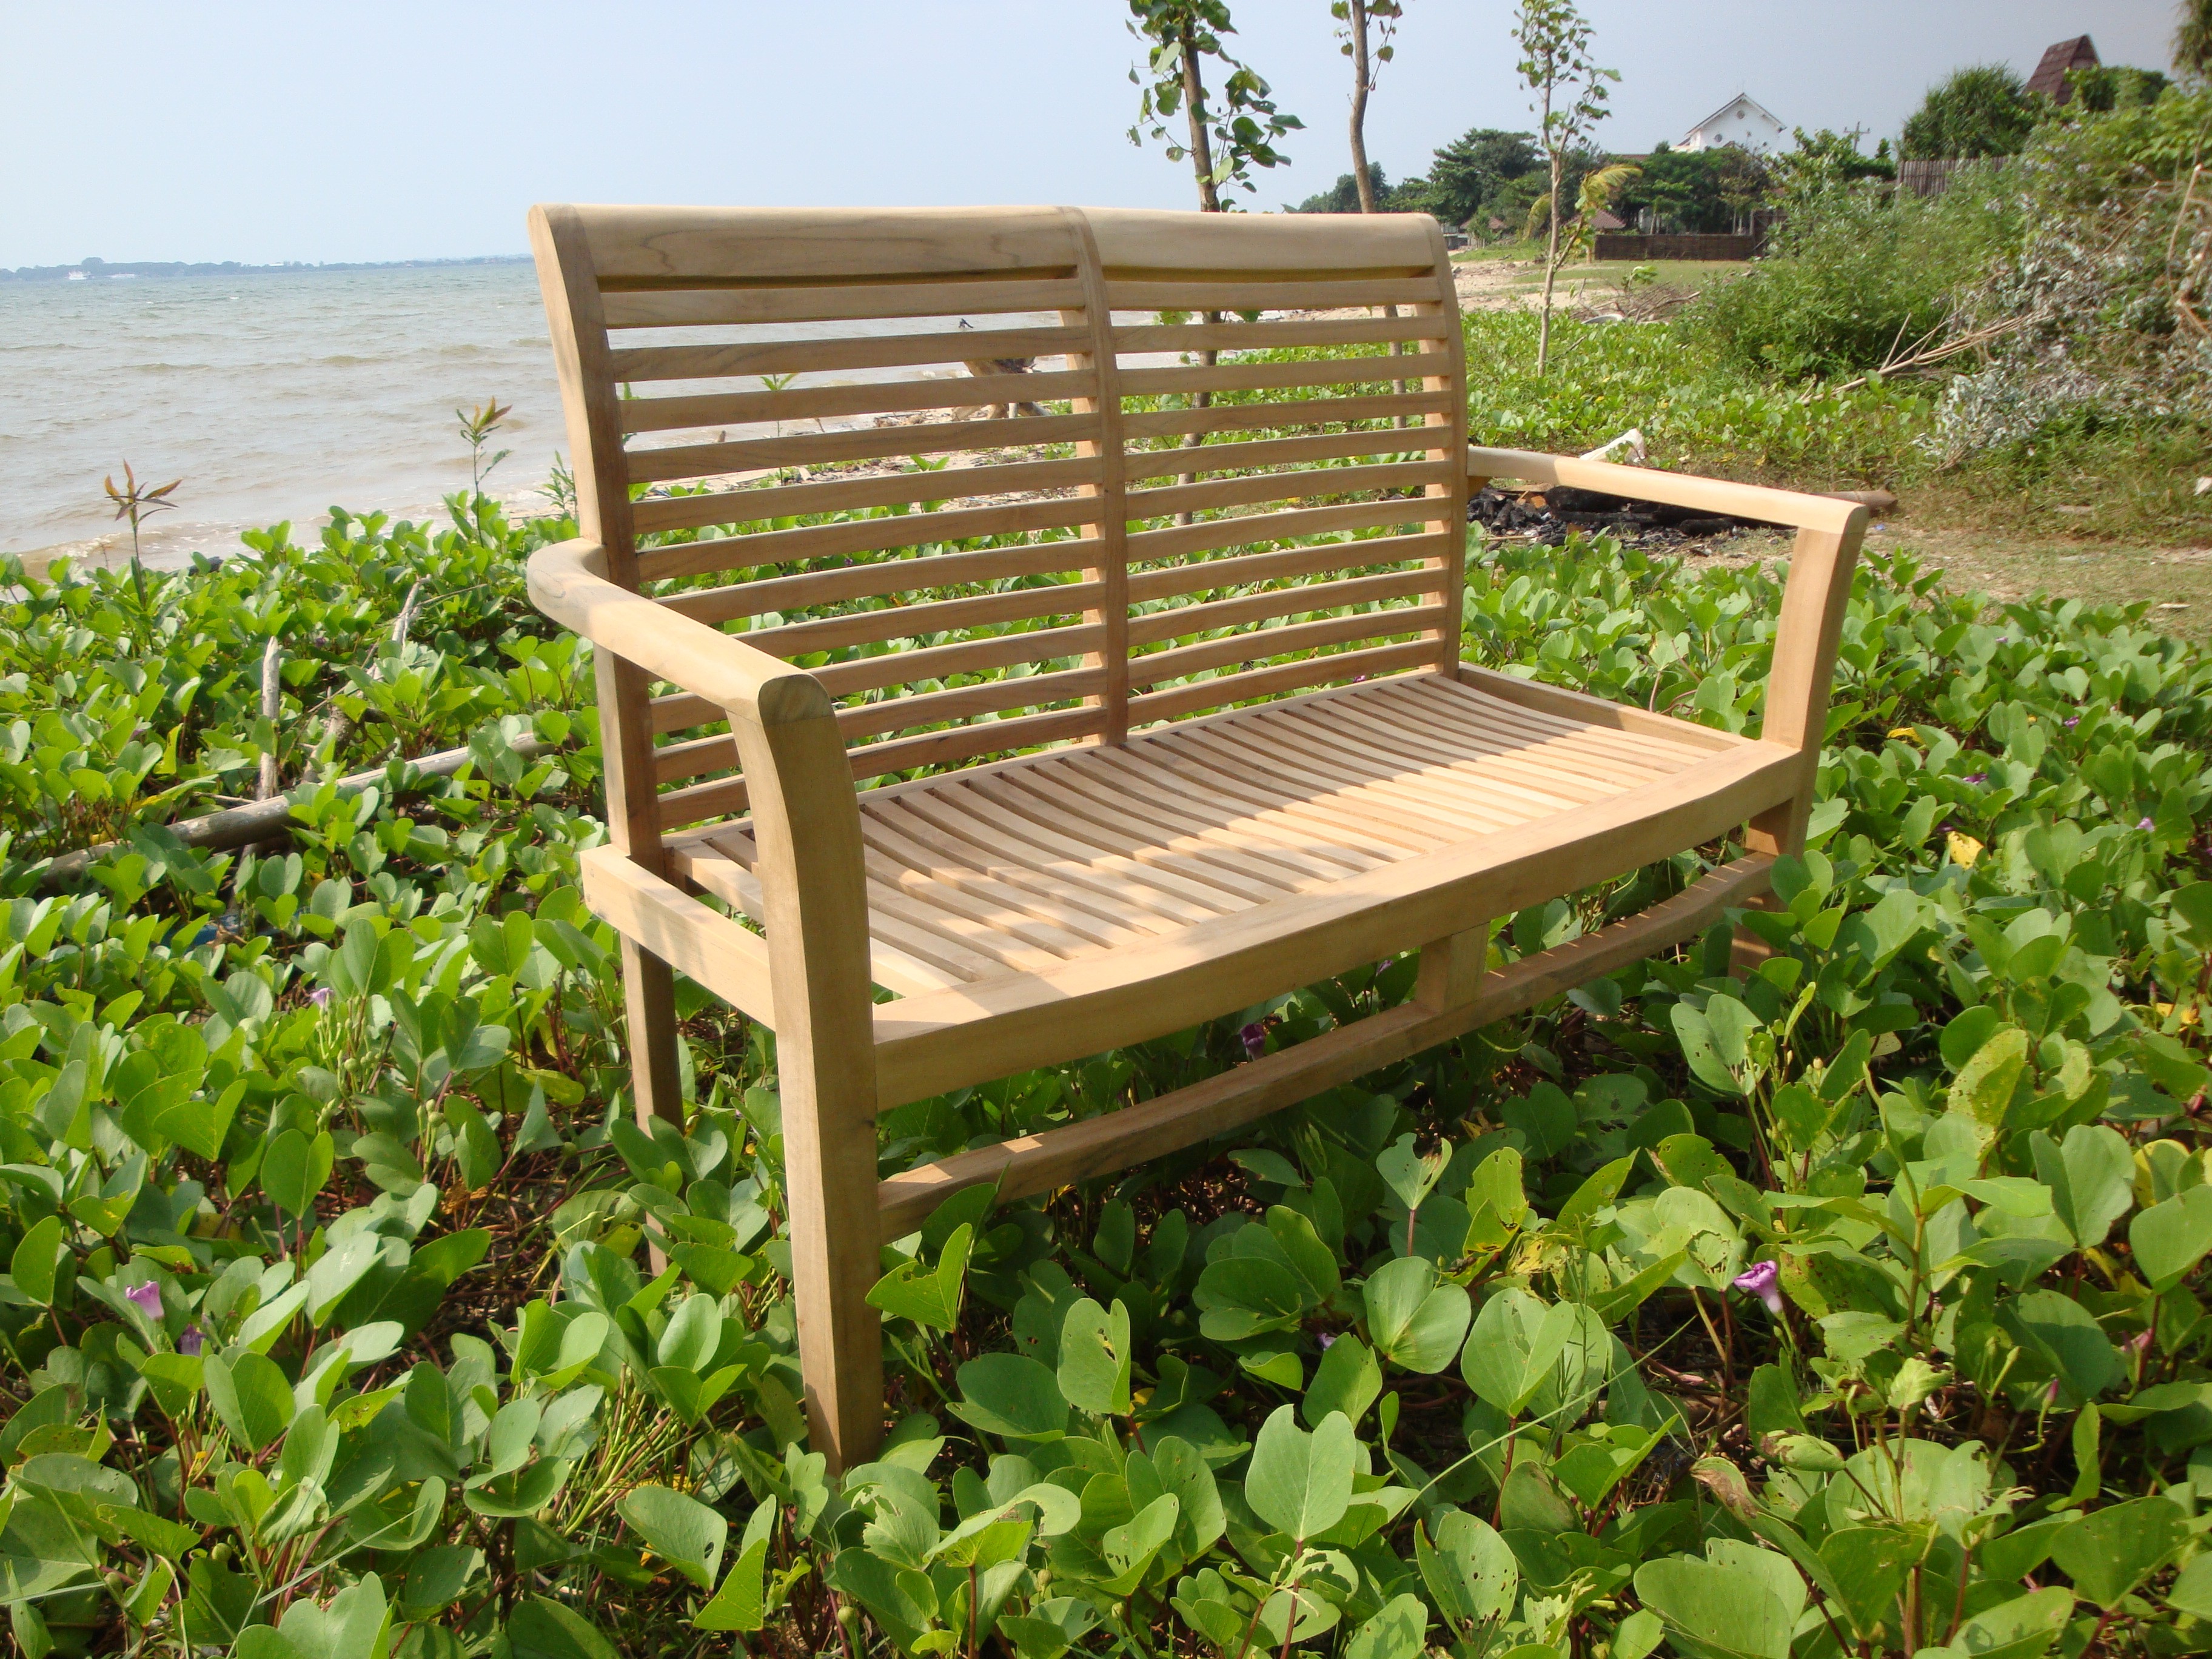 48" Casa Blanca Teak 2 Seater Stacking Bench...Priced and Packed 2 Per Box